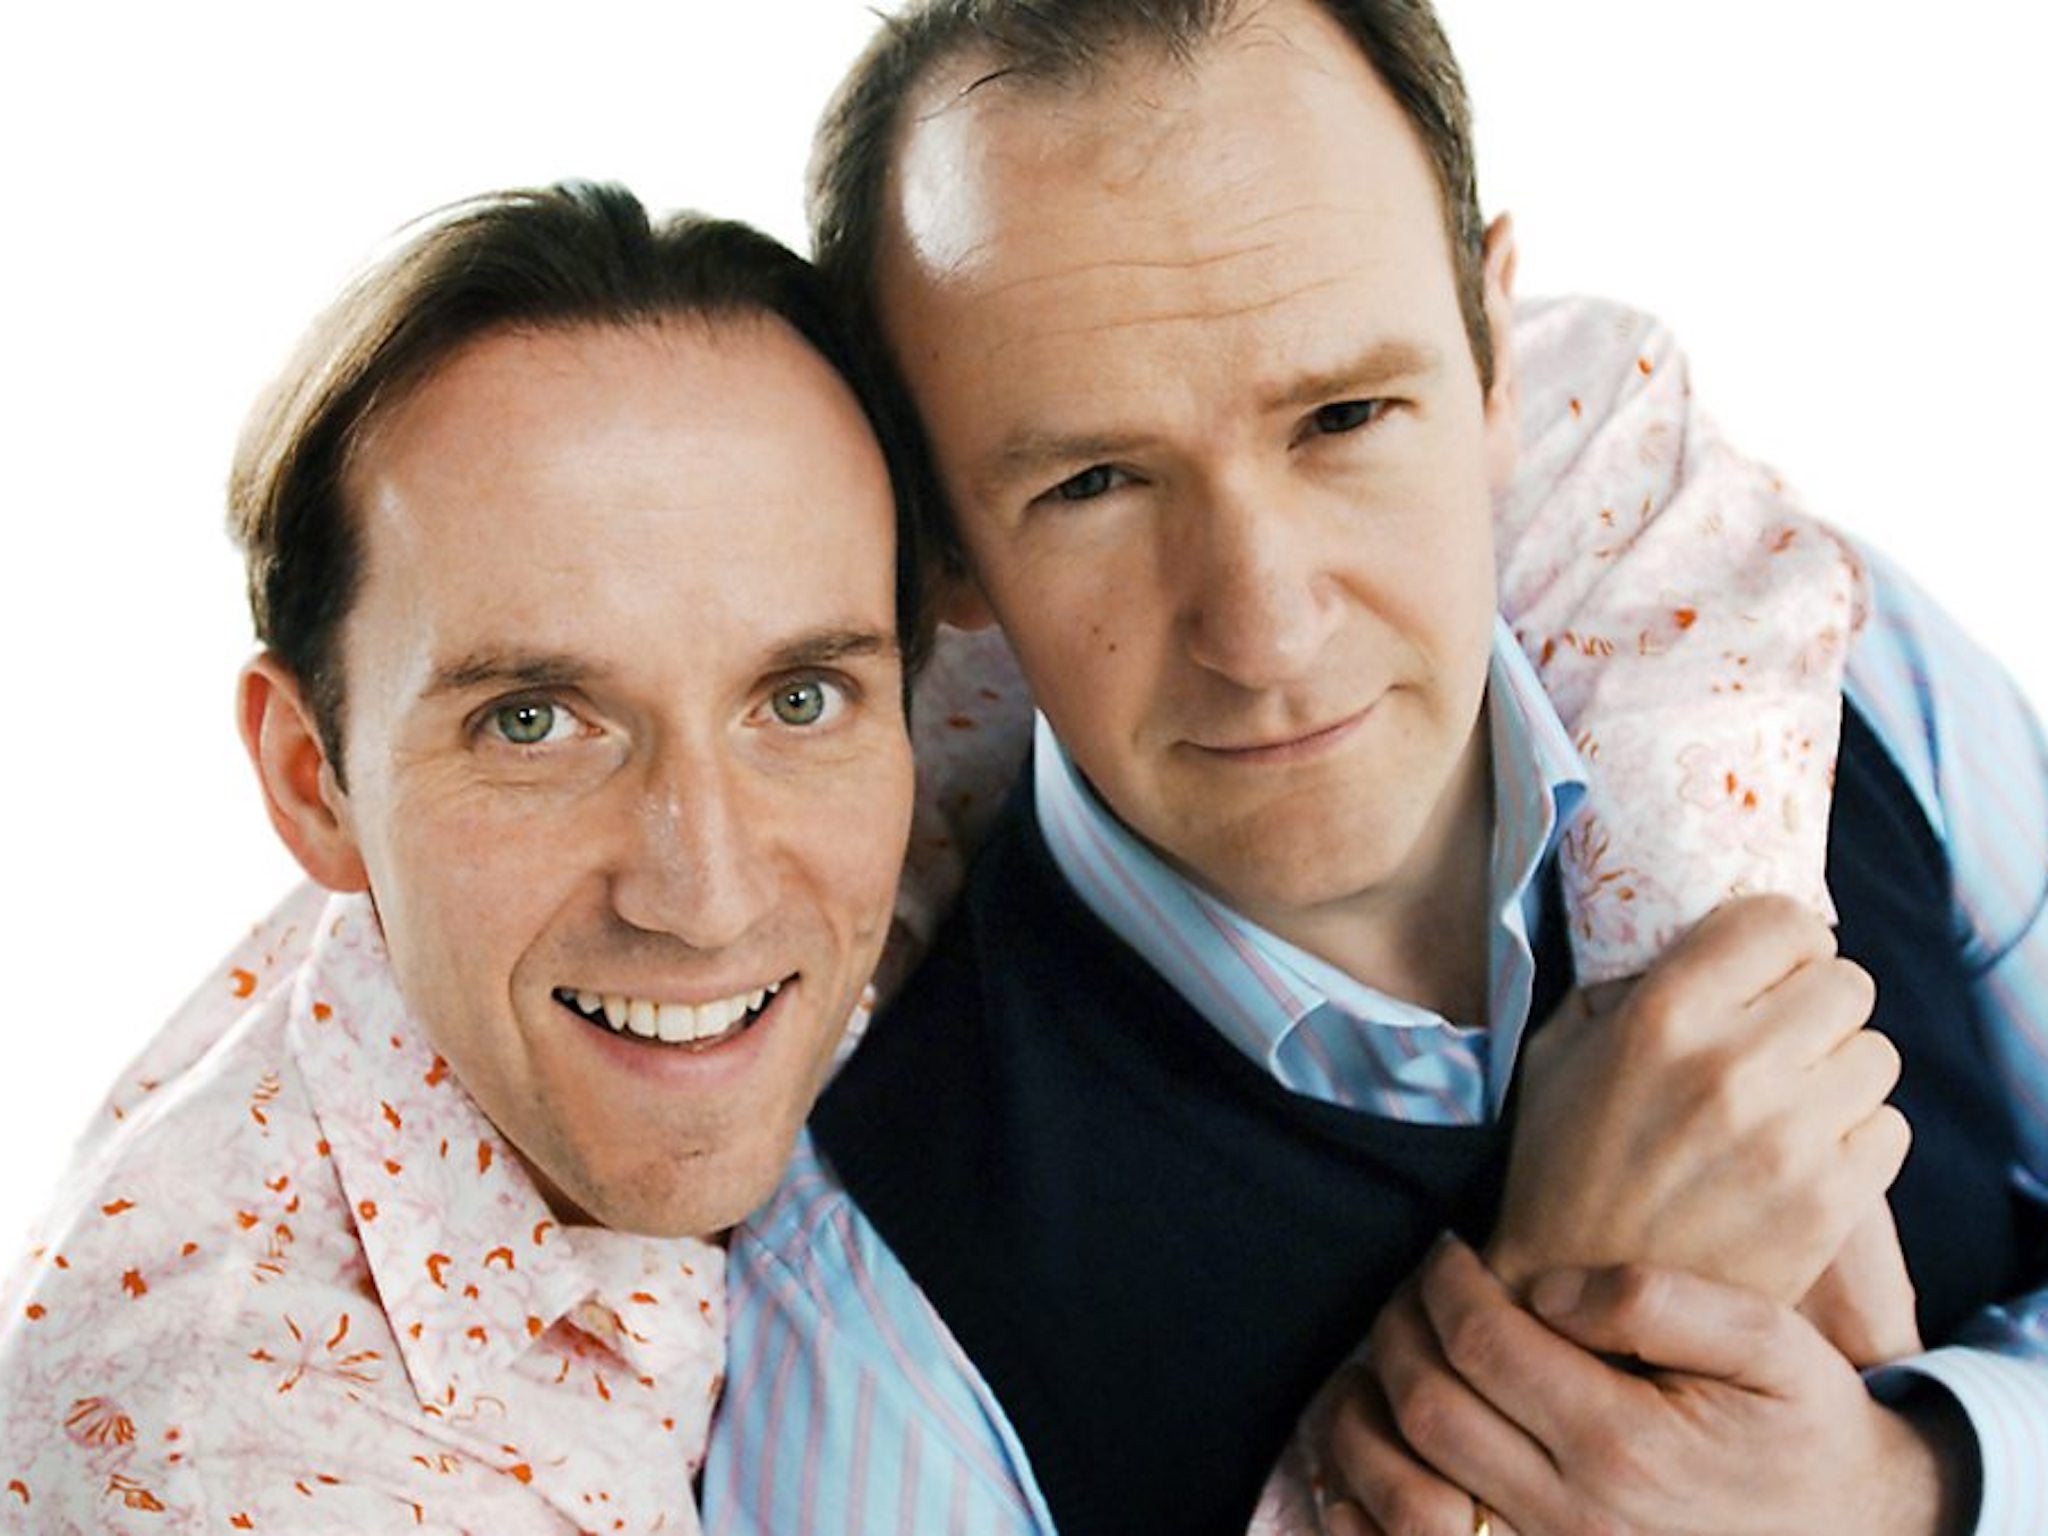 ‘The Armstrong & Miller Show’ ran on BBC One ran for three seasons from 2007 to 2010